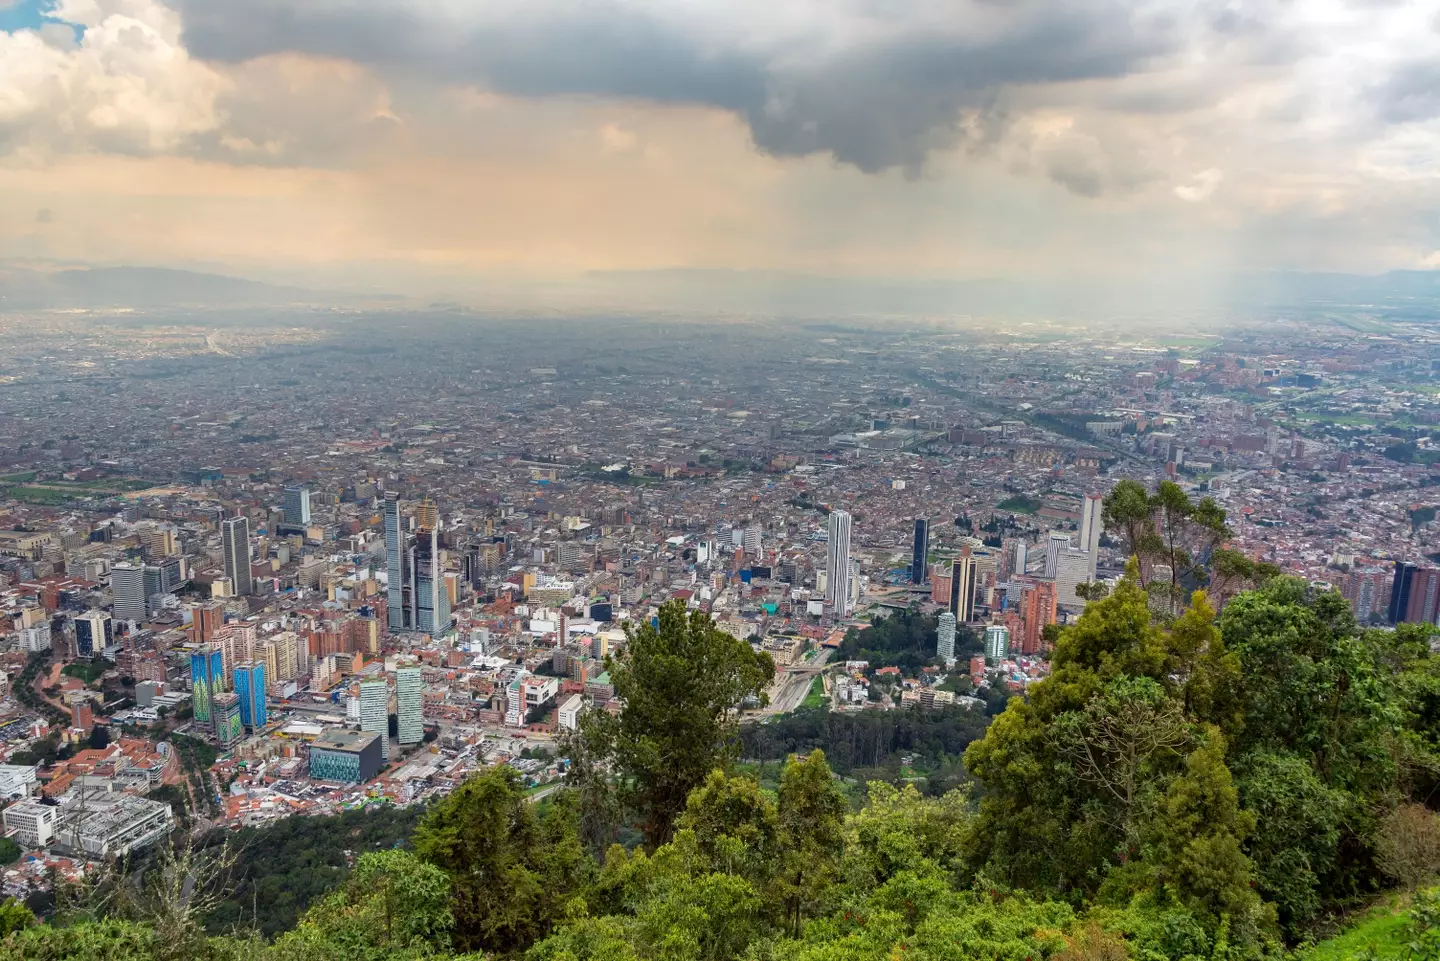 Bogota, the capital of Colombia, is the Devil's Breath capital of the world.